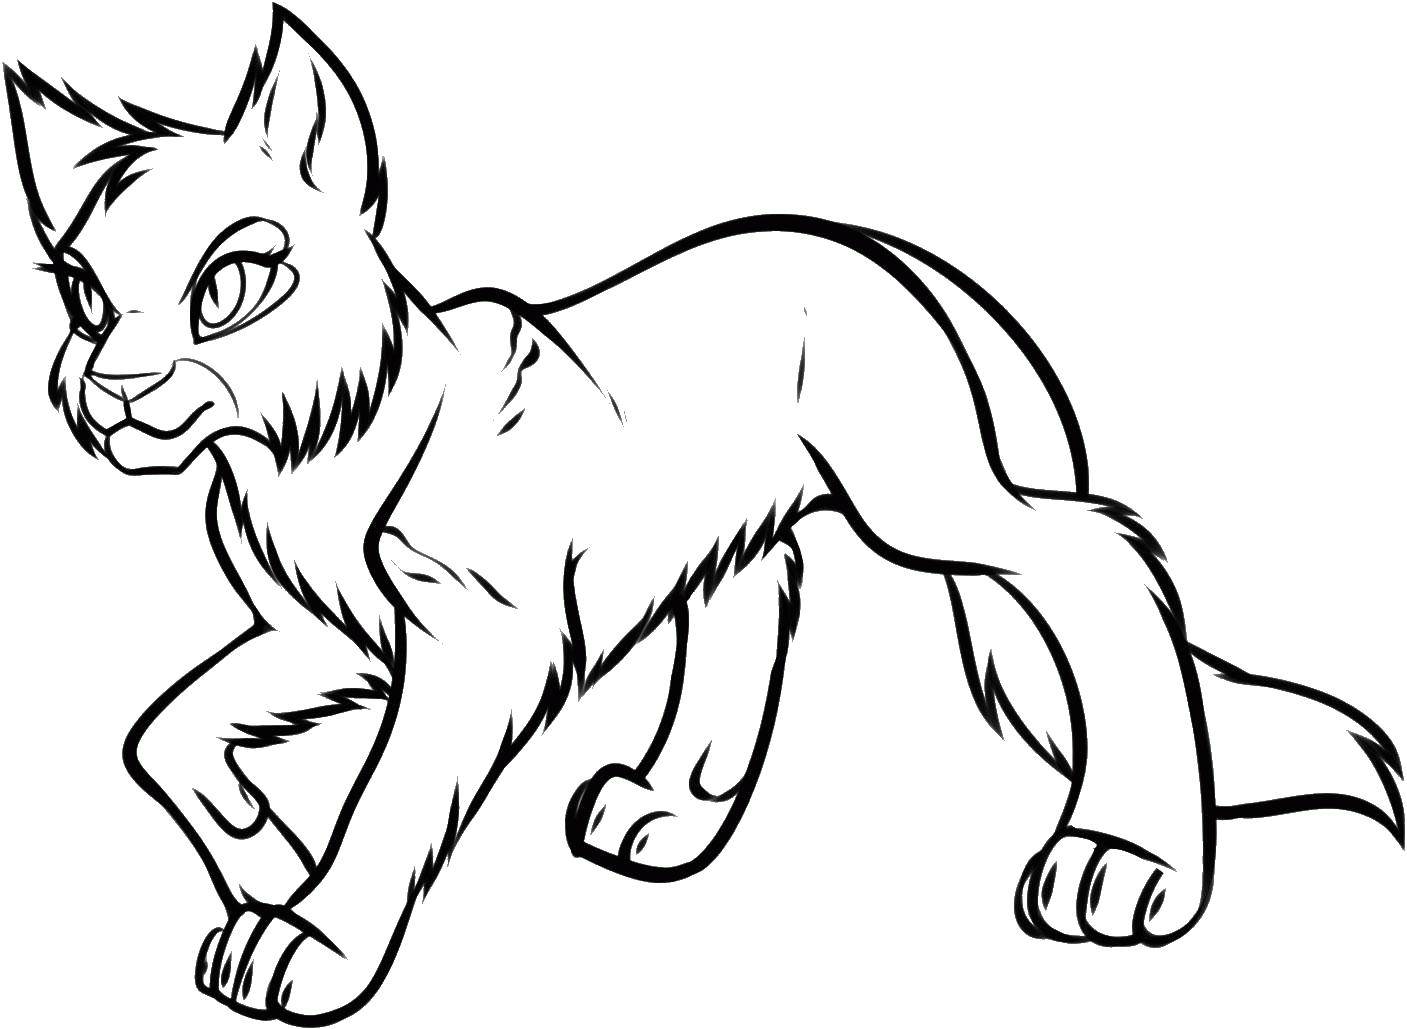 Coloring Predatory cat. Category Cats and kittens. Tags:  animals, cat, predator.